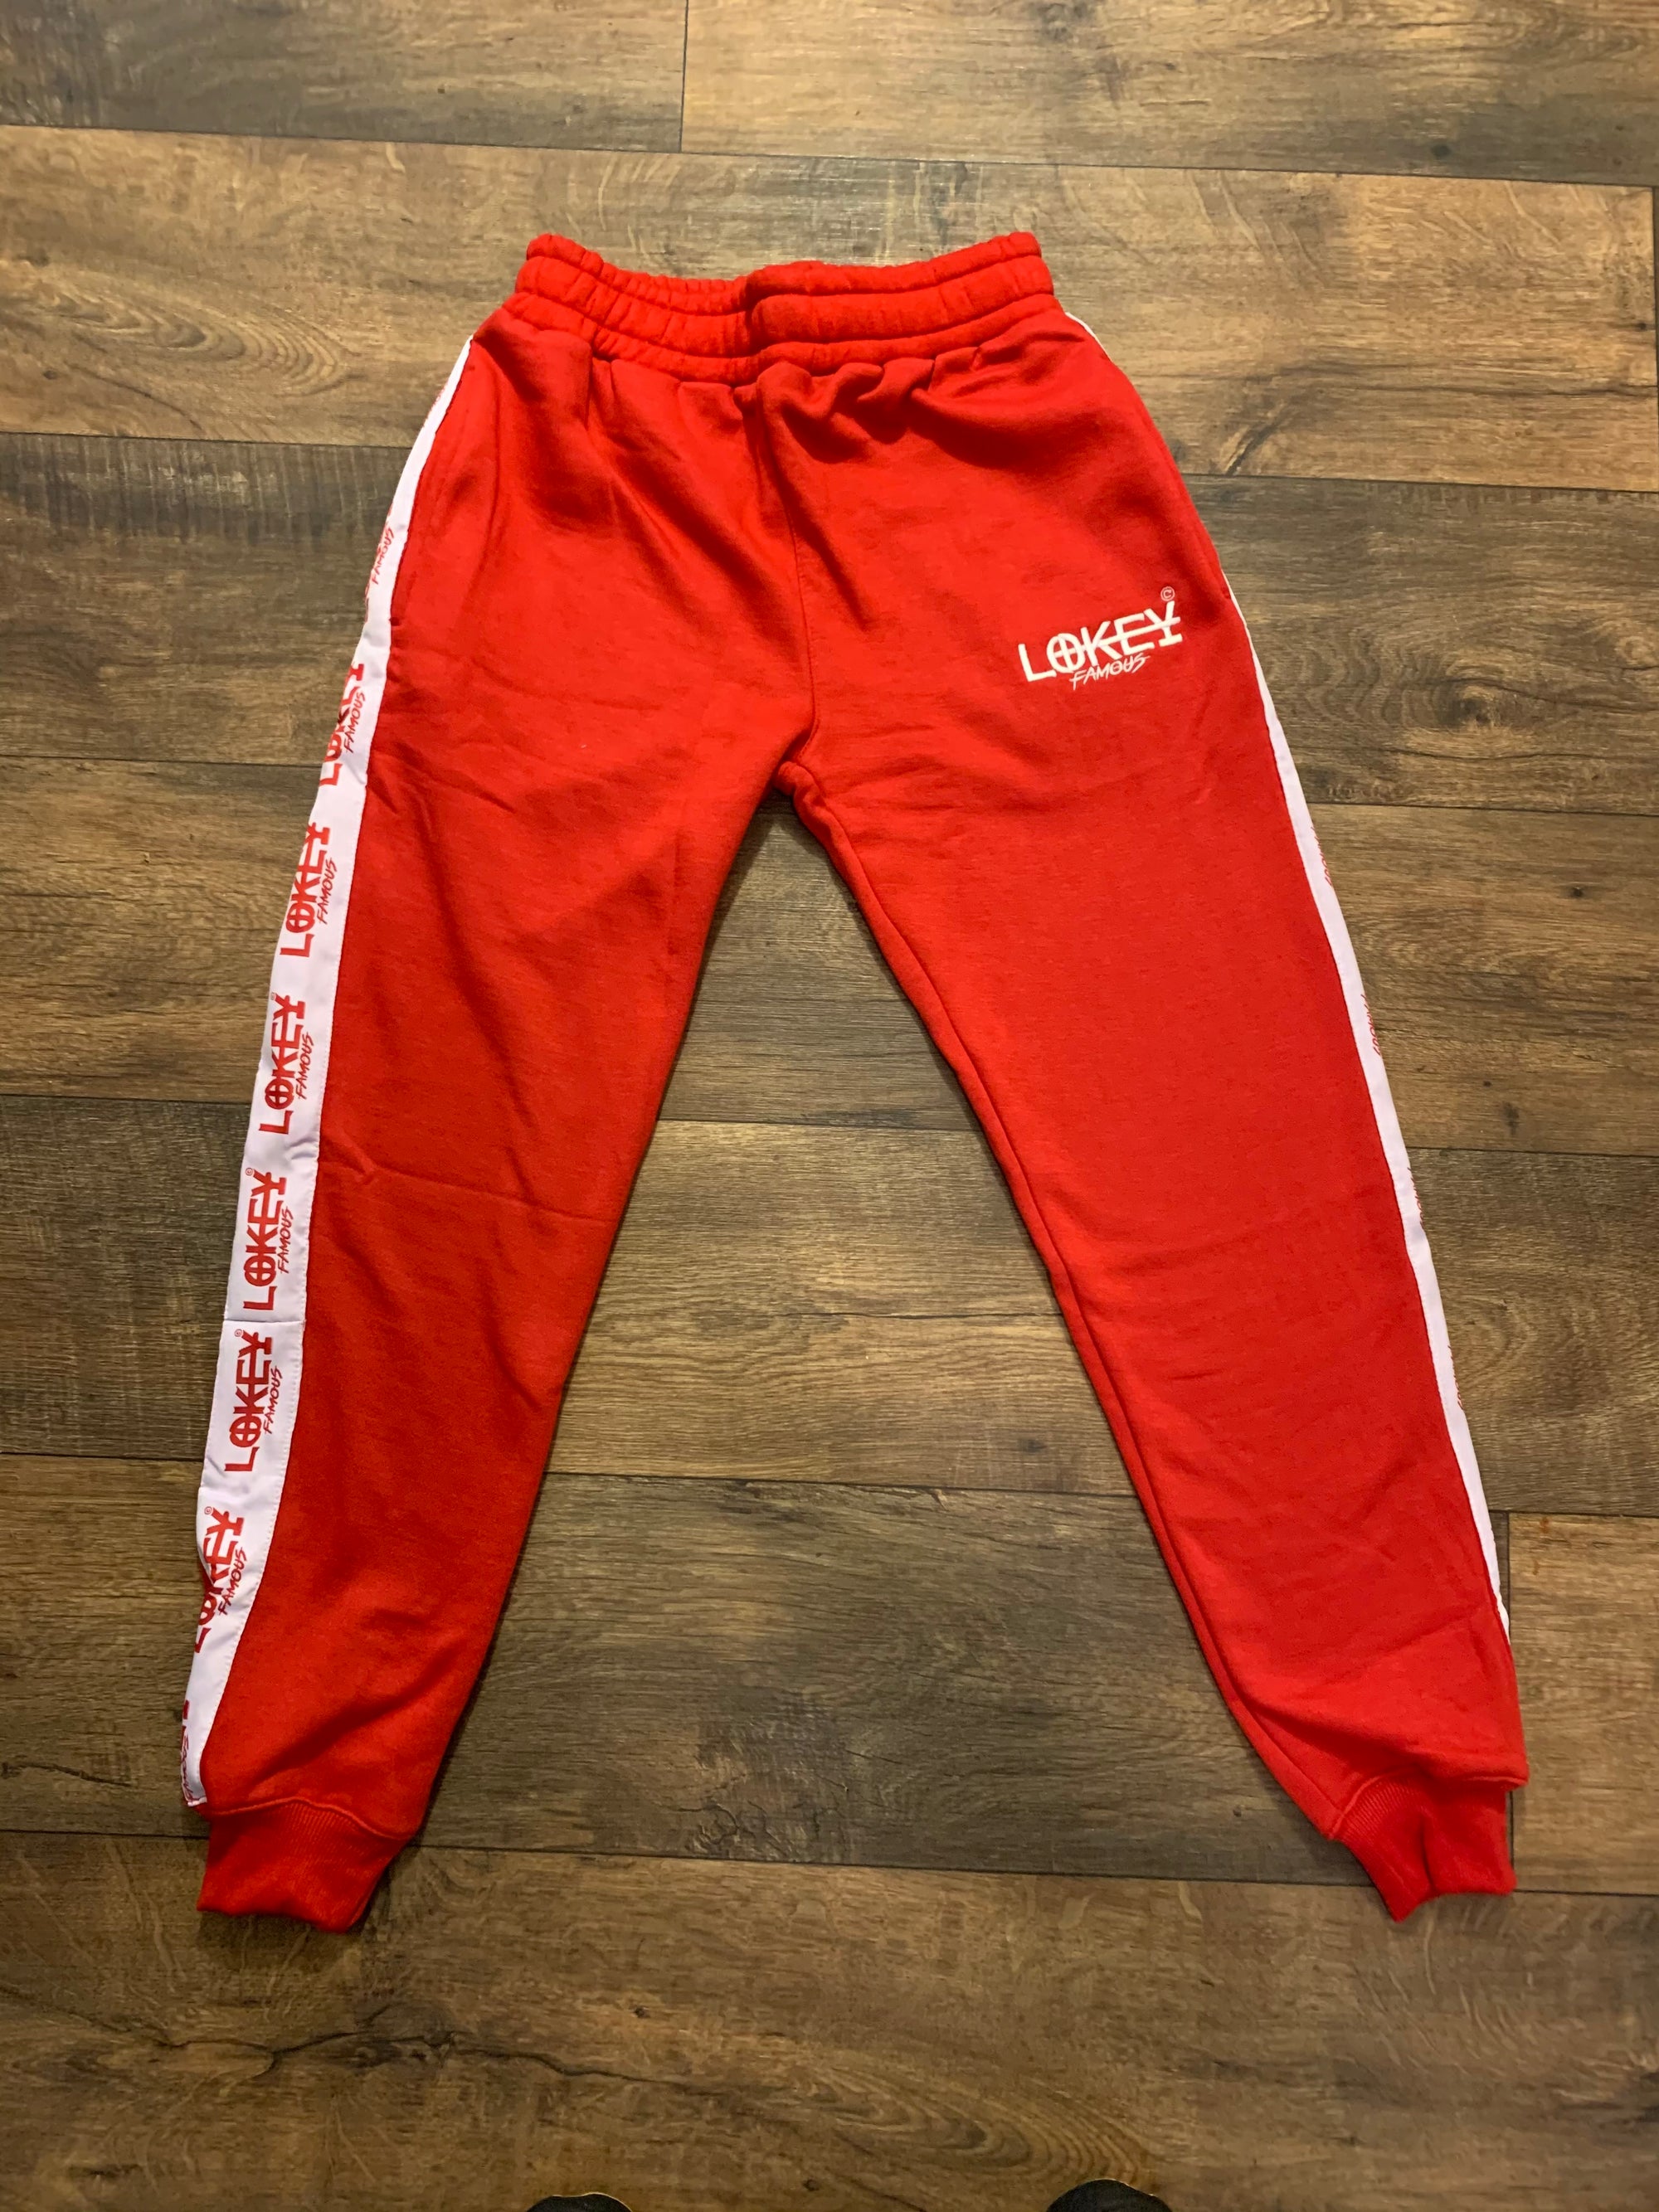 Red sweatpants with white stripe